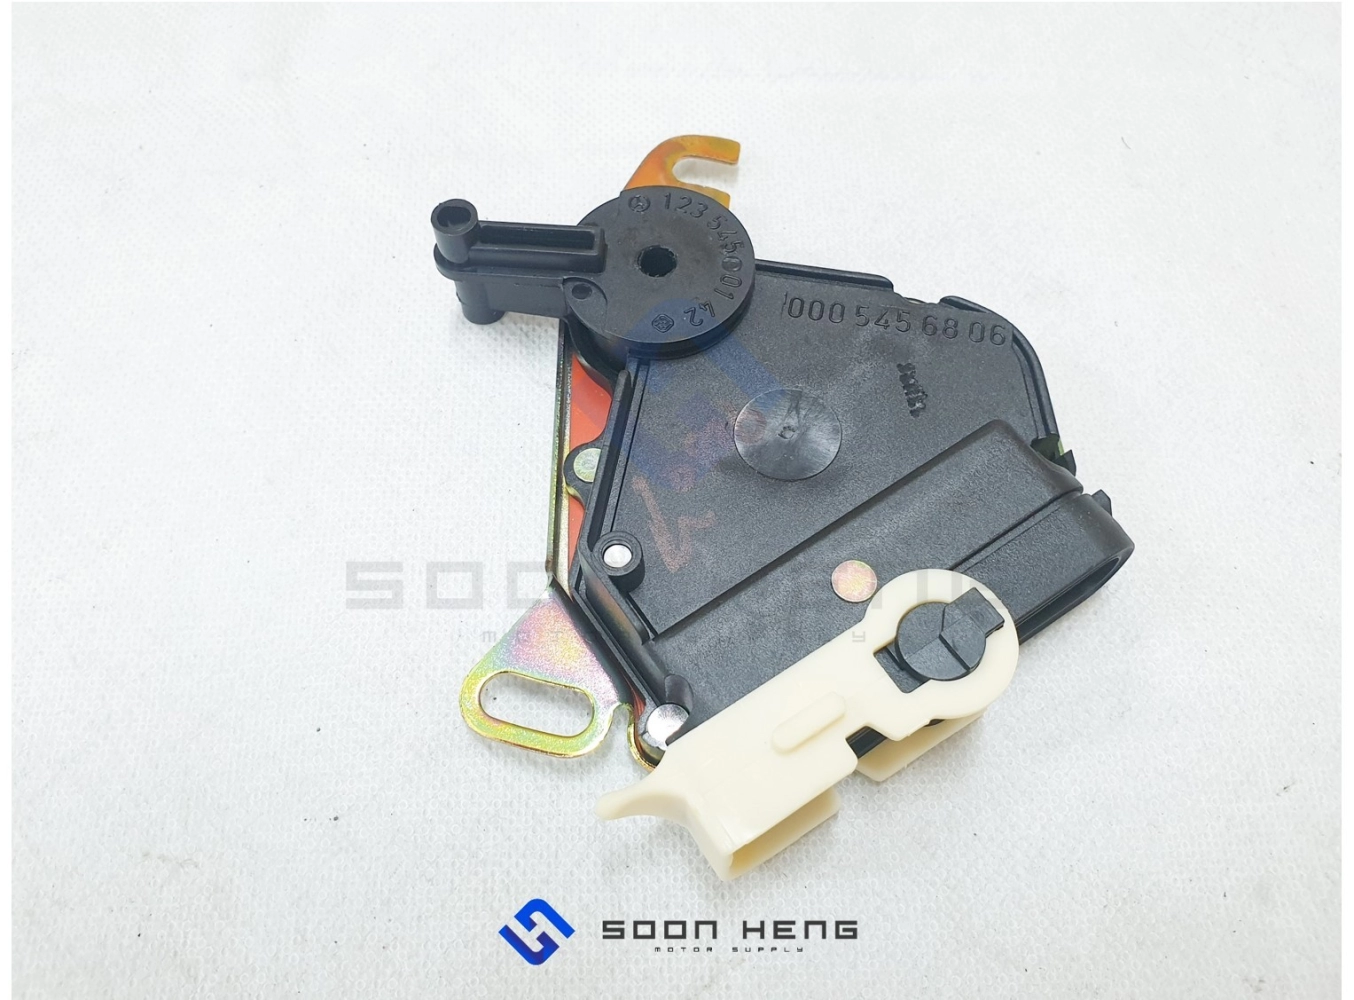 Mercedes-Benz with Transmission 722.4 - Declutching-Start or Back-Up Light or Kick-Down Switch (Original MB) 